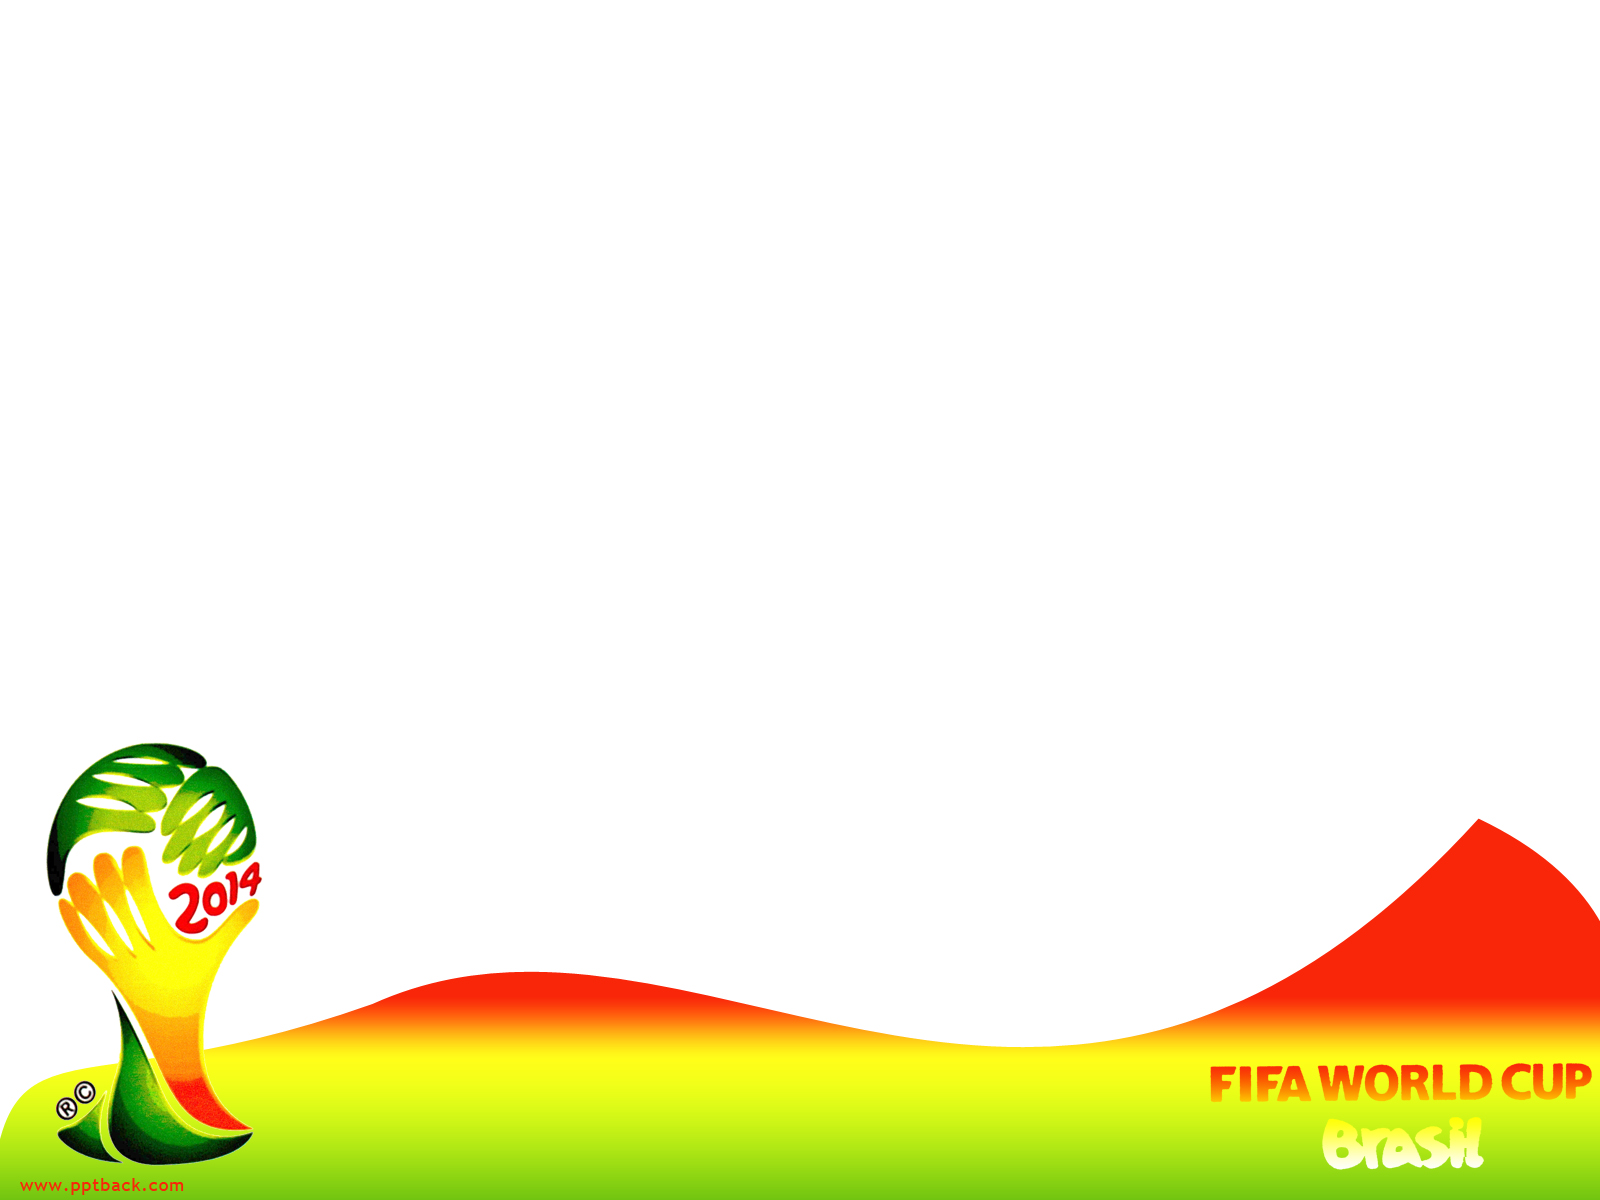 Fifa Wordcup Brasil 2014 backgrounds